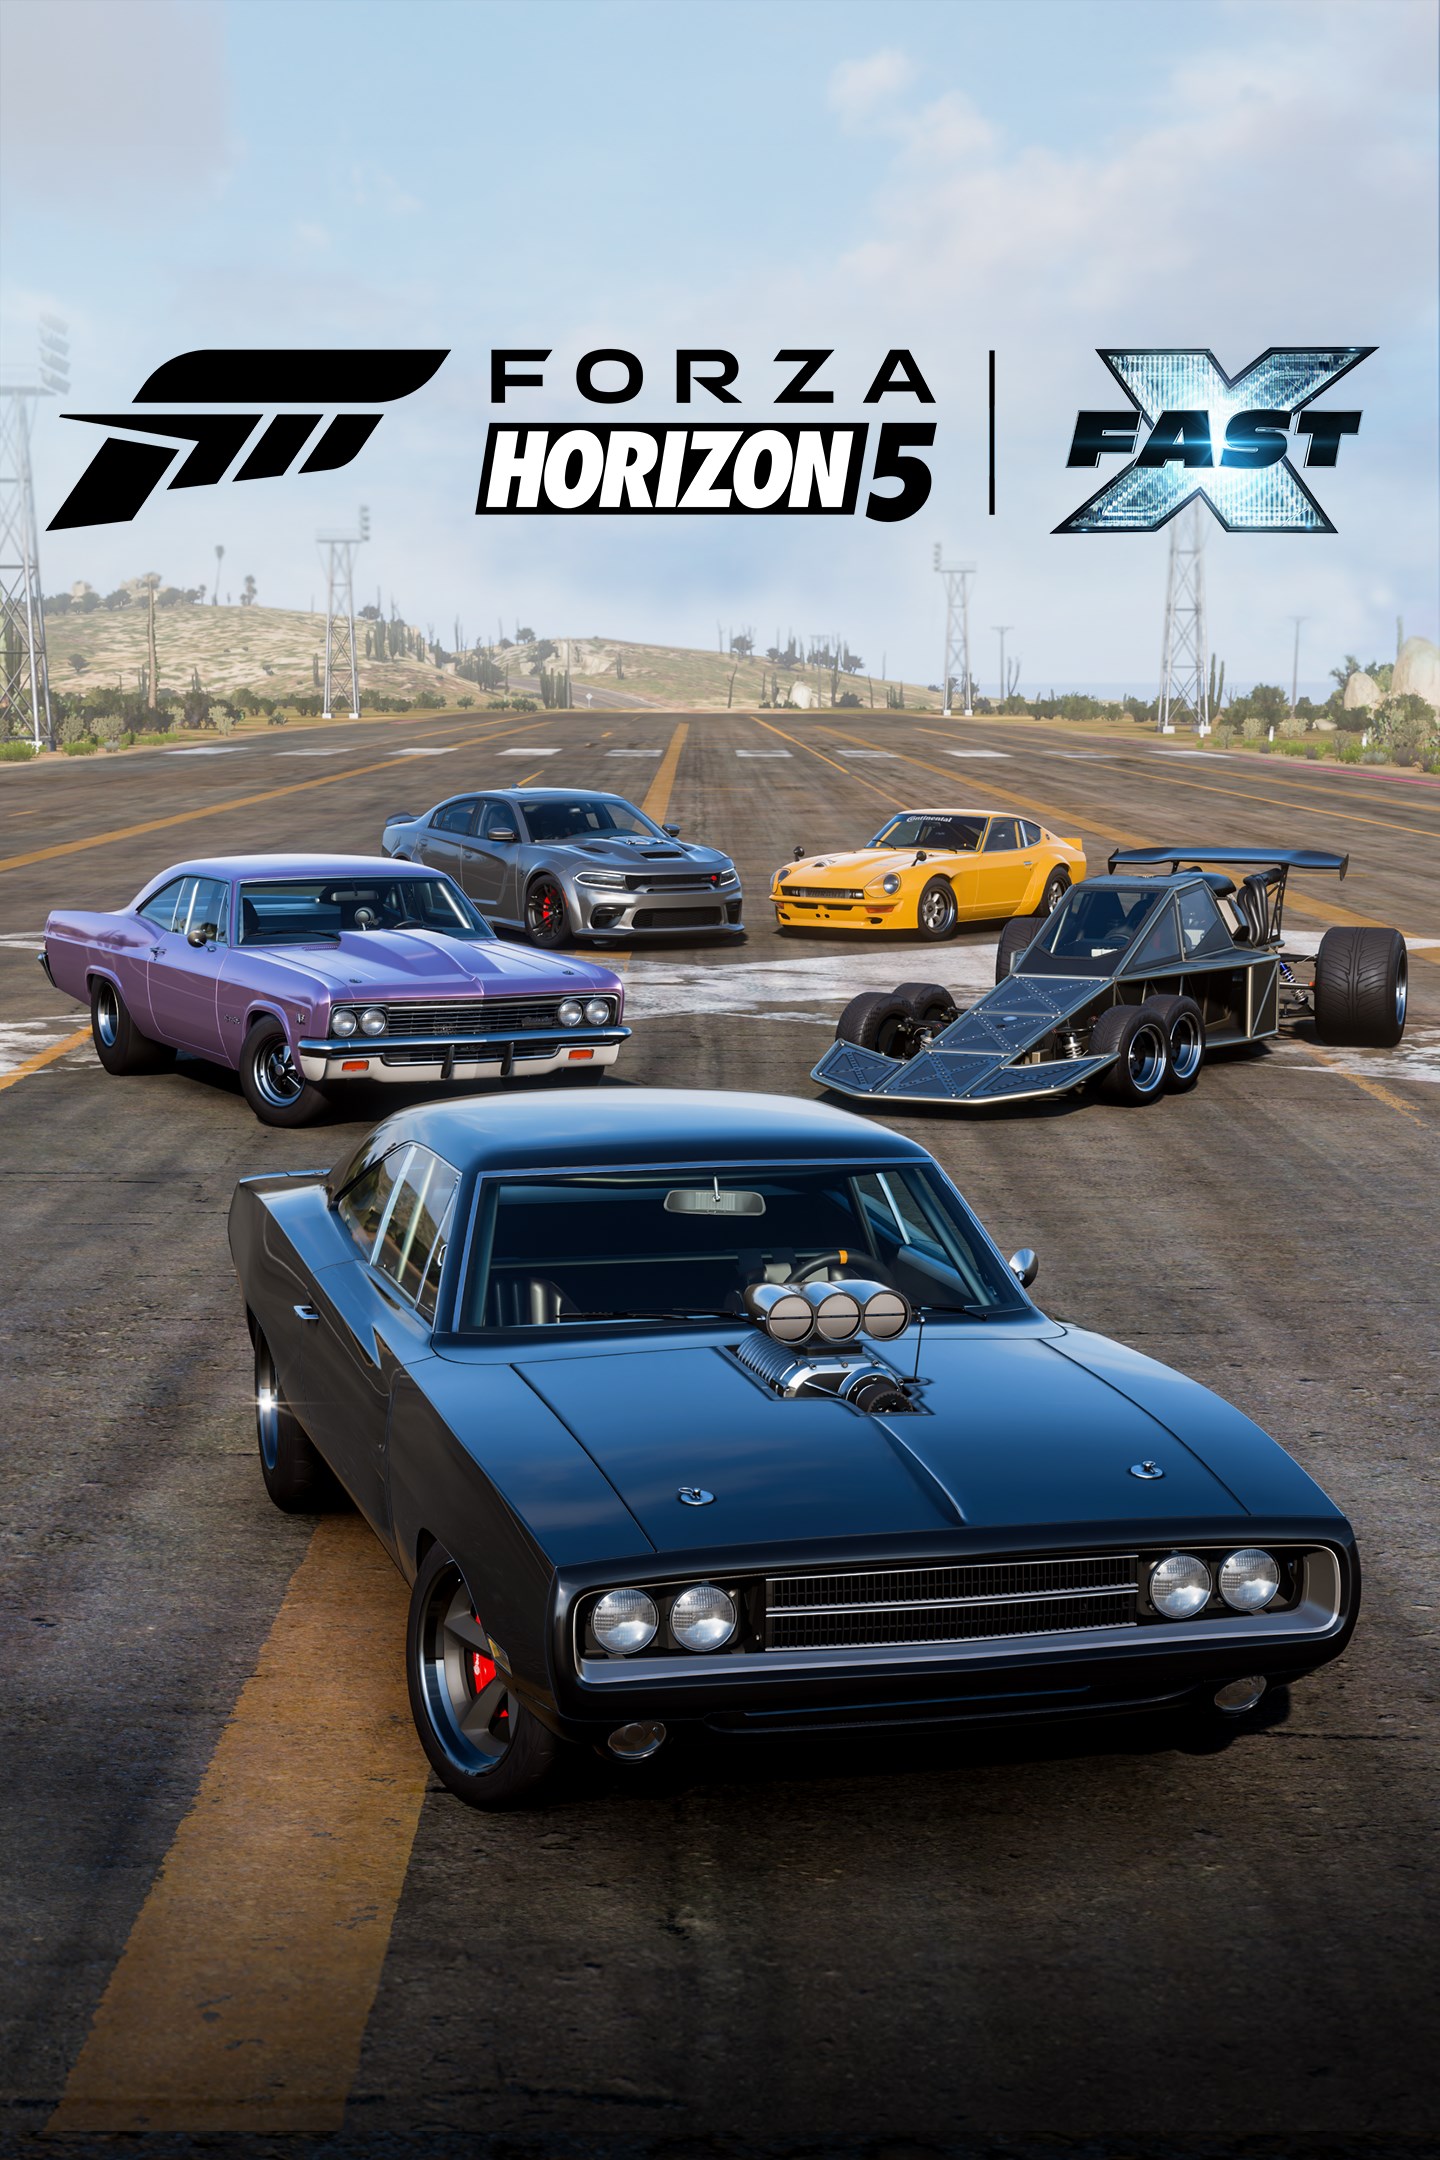 Forza Horizon 5 Fast X Car Pack on Steam